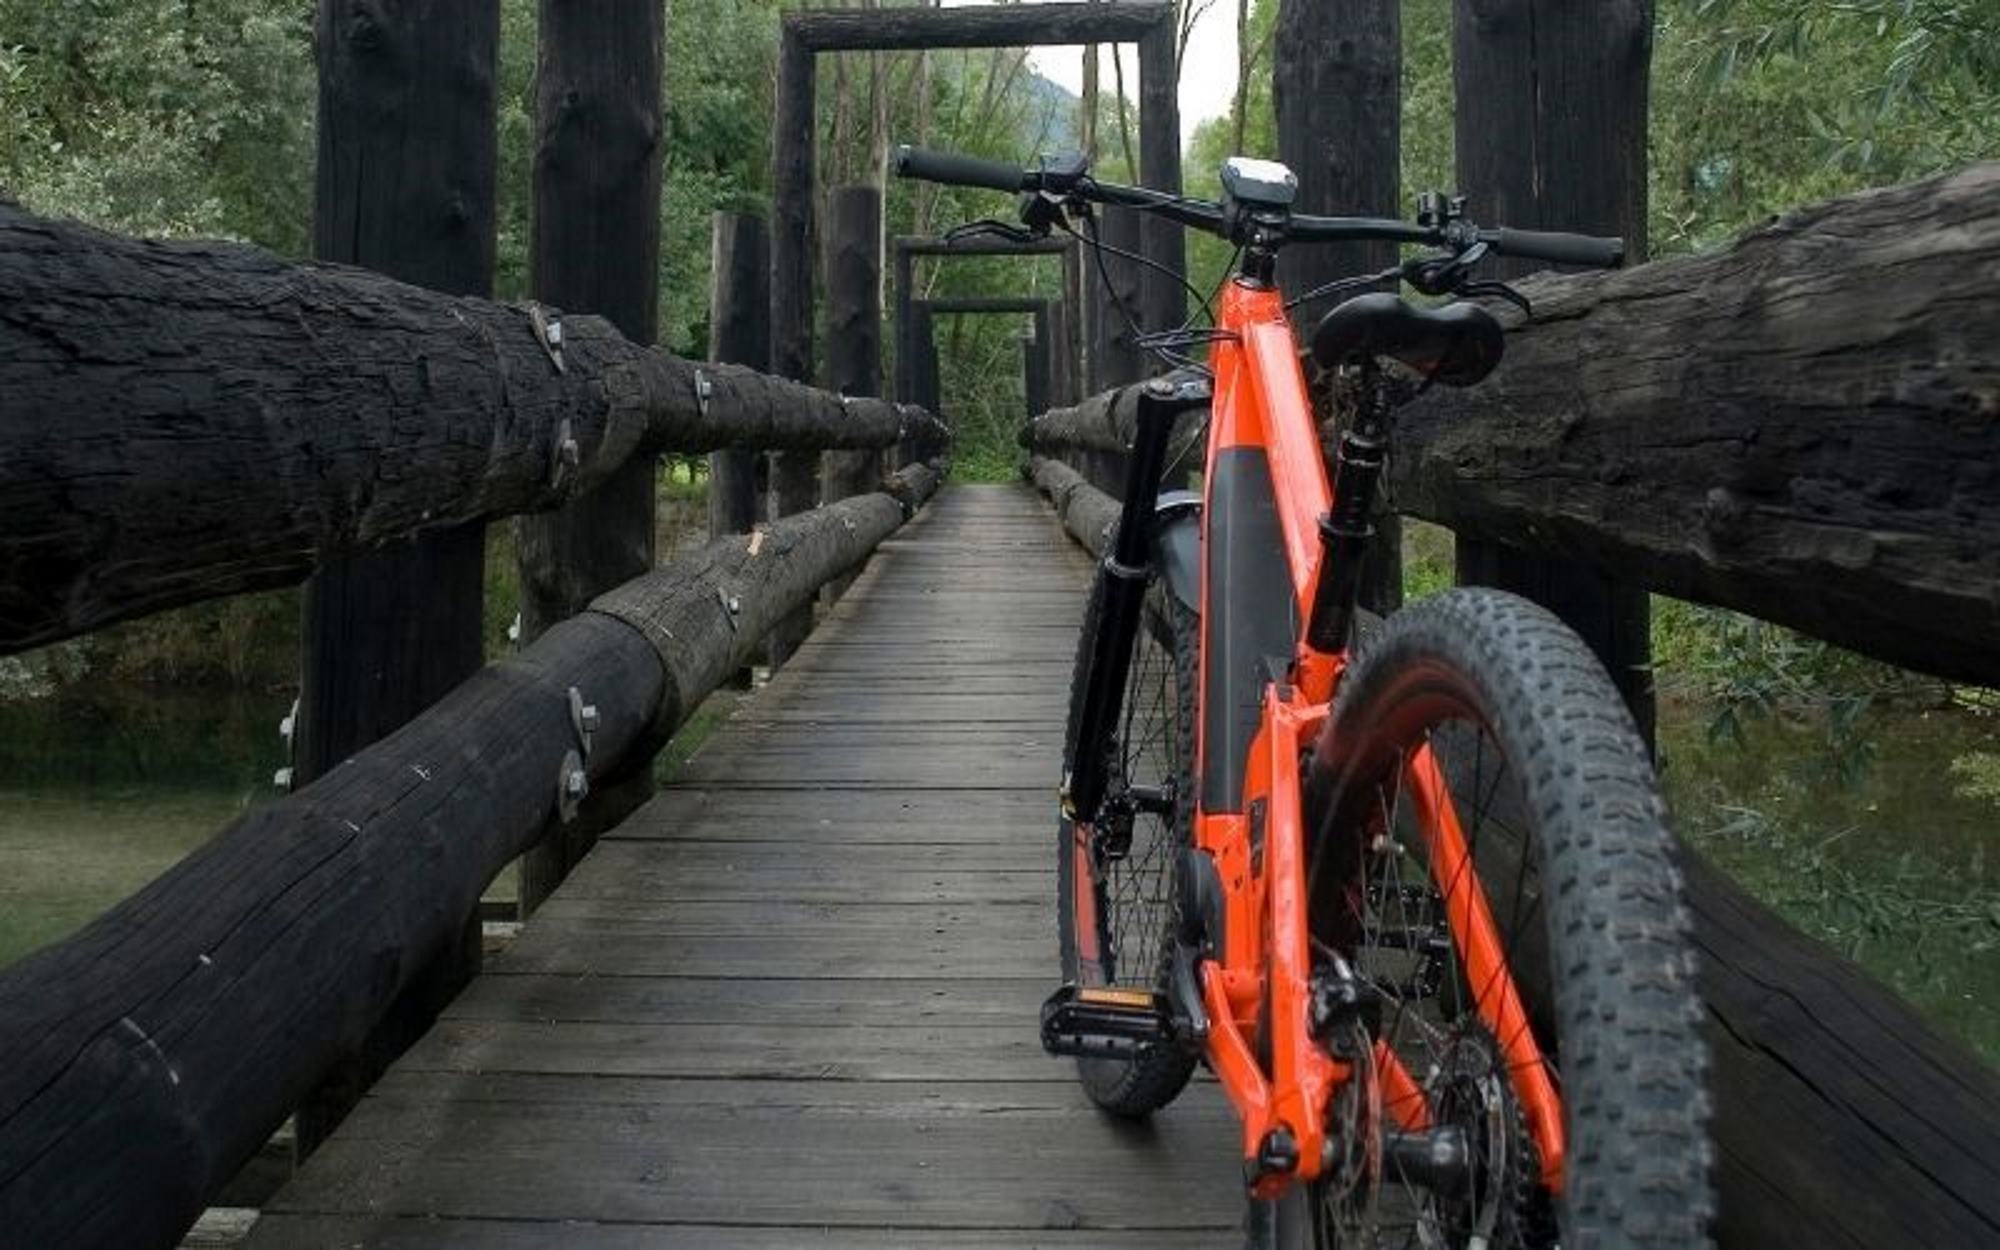 A bridge of a famous cycling trail in the US